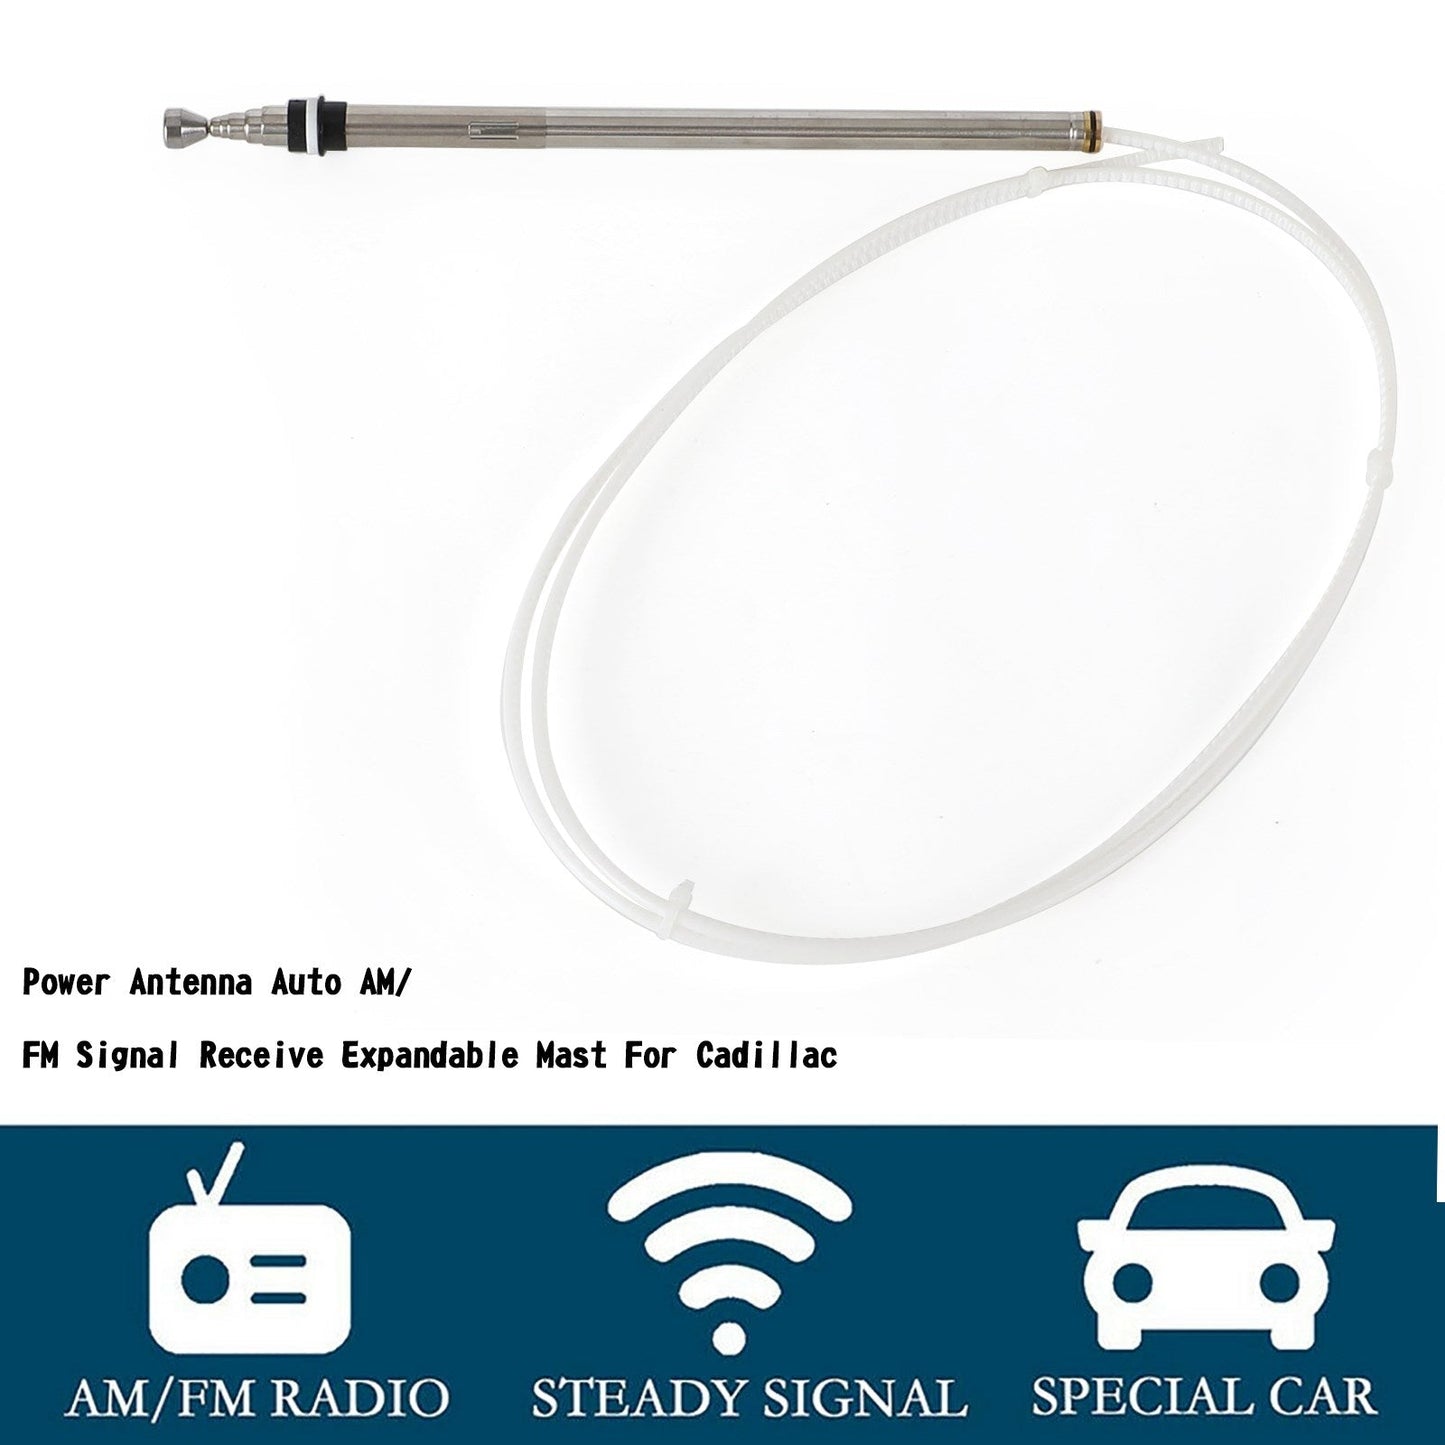 Power Antenna Auto AM/FM Signal Receive Expandable Mast For Cadillac